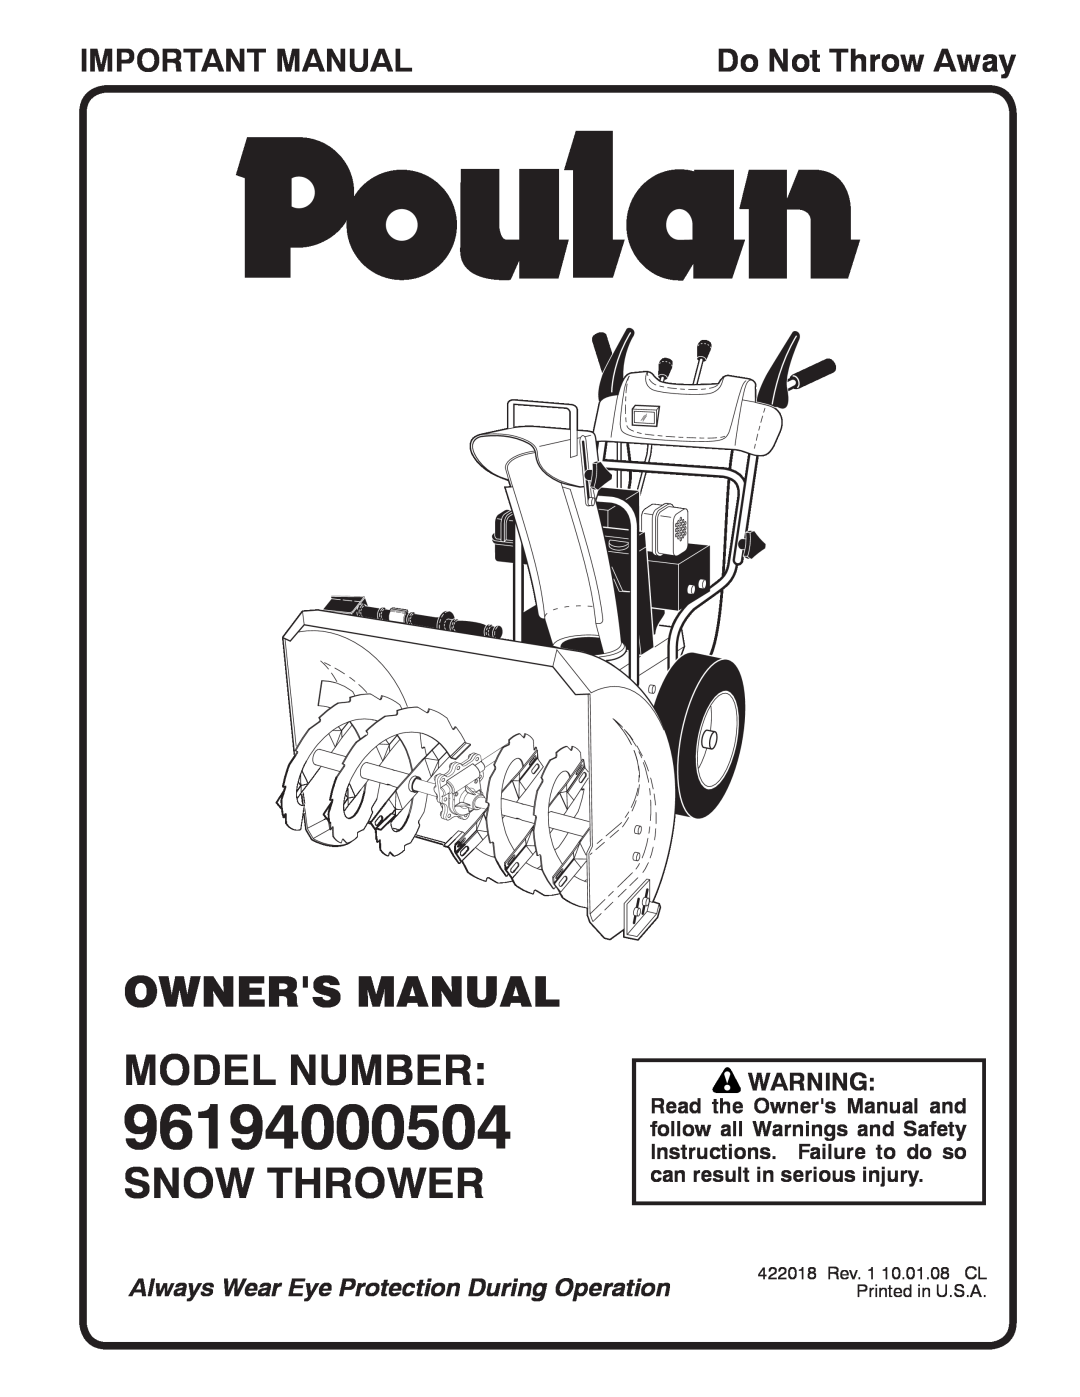 Poulan 96194000504 owner manual Snow Thrower, Important Manual, Do Not Throw Away 